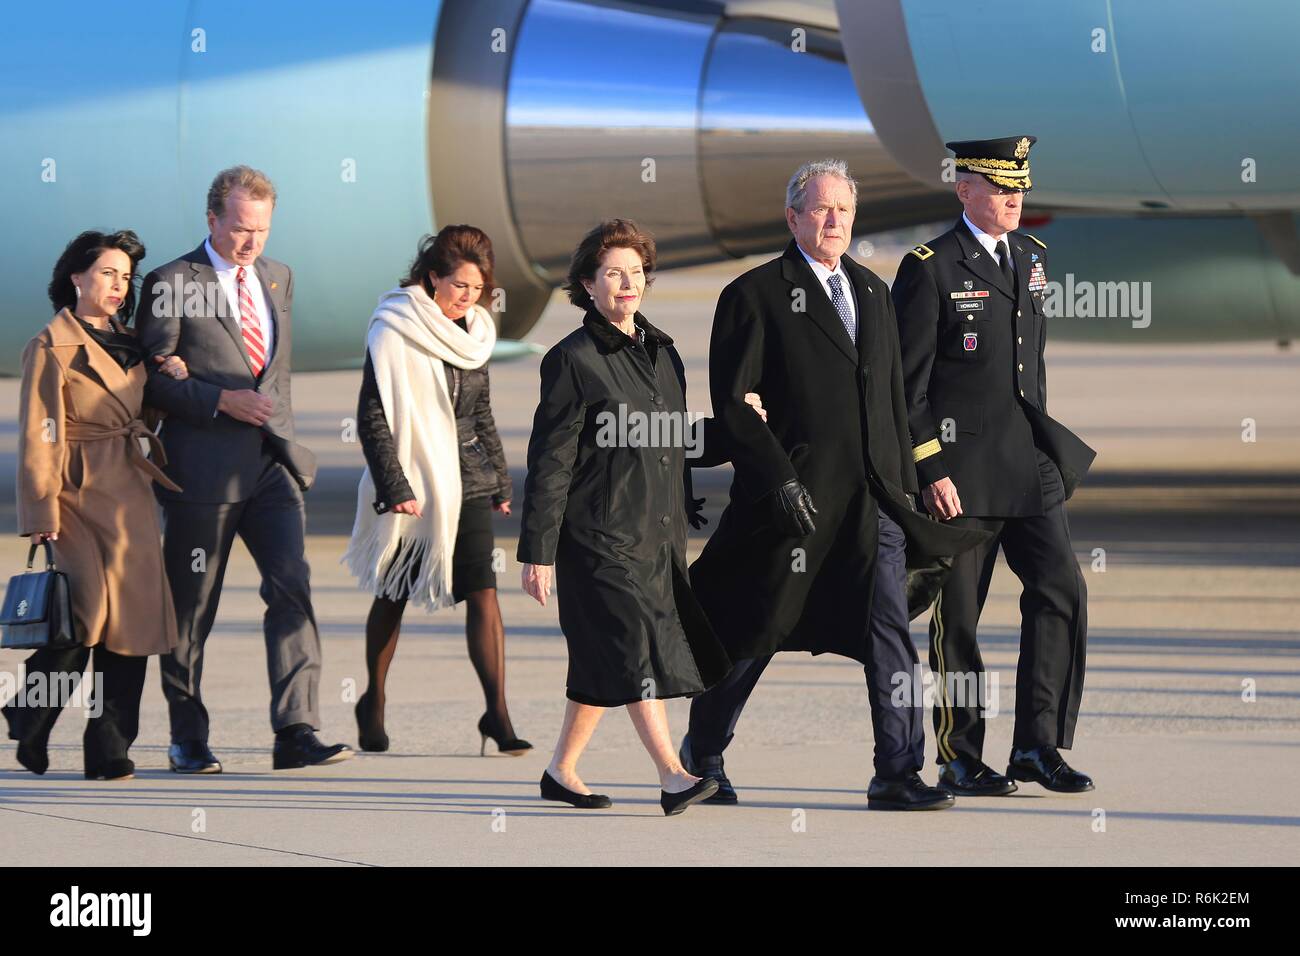 Former President George W. Bush, right, and First Lady Laura Bush, center, arrive from Houston with the the flag-draped casket of his father, former president George H.W. Bush aboard Air Force One December 3, 2018 in Andrews, Maryland. Bush, the 41st President, died in his Houston home at age 94. Stock Photo